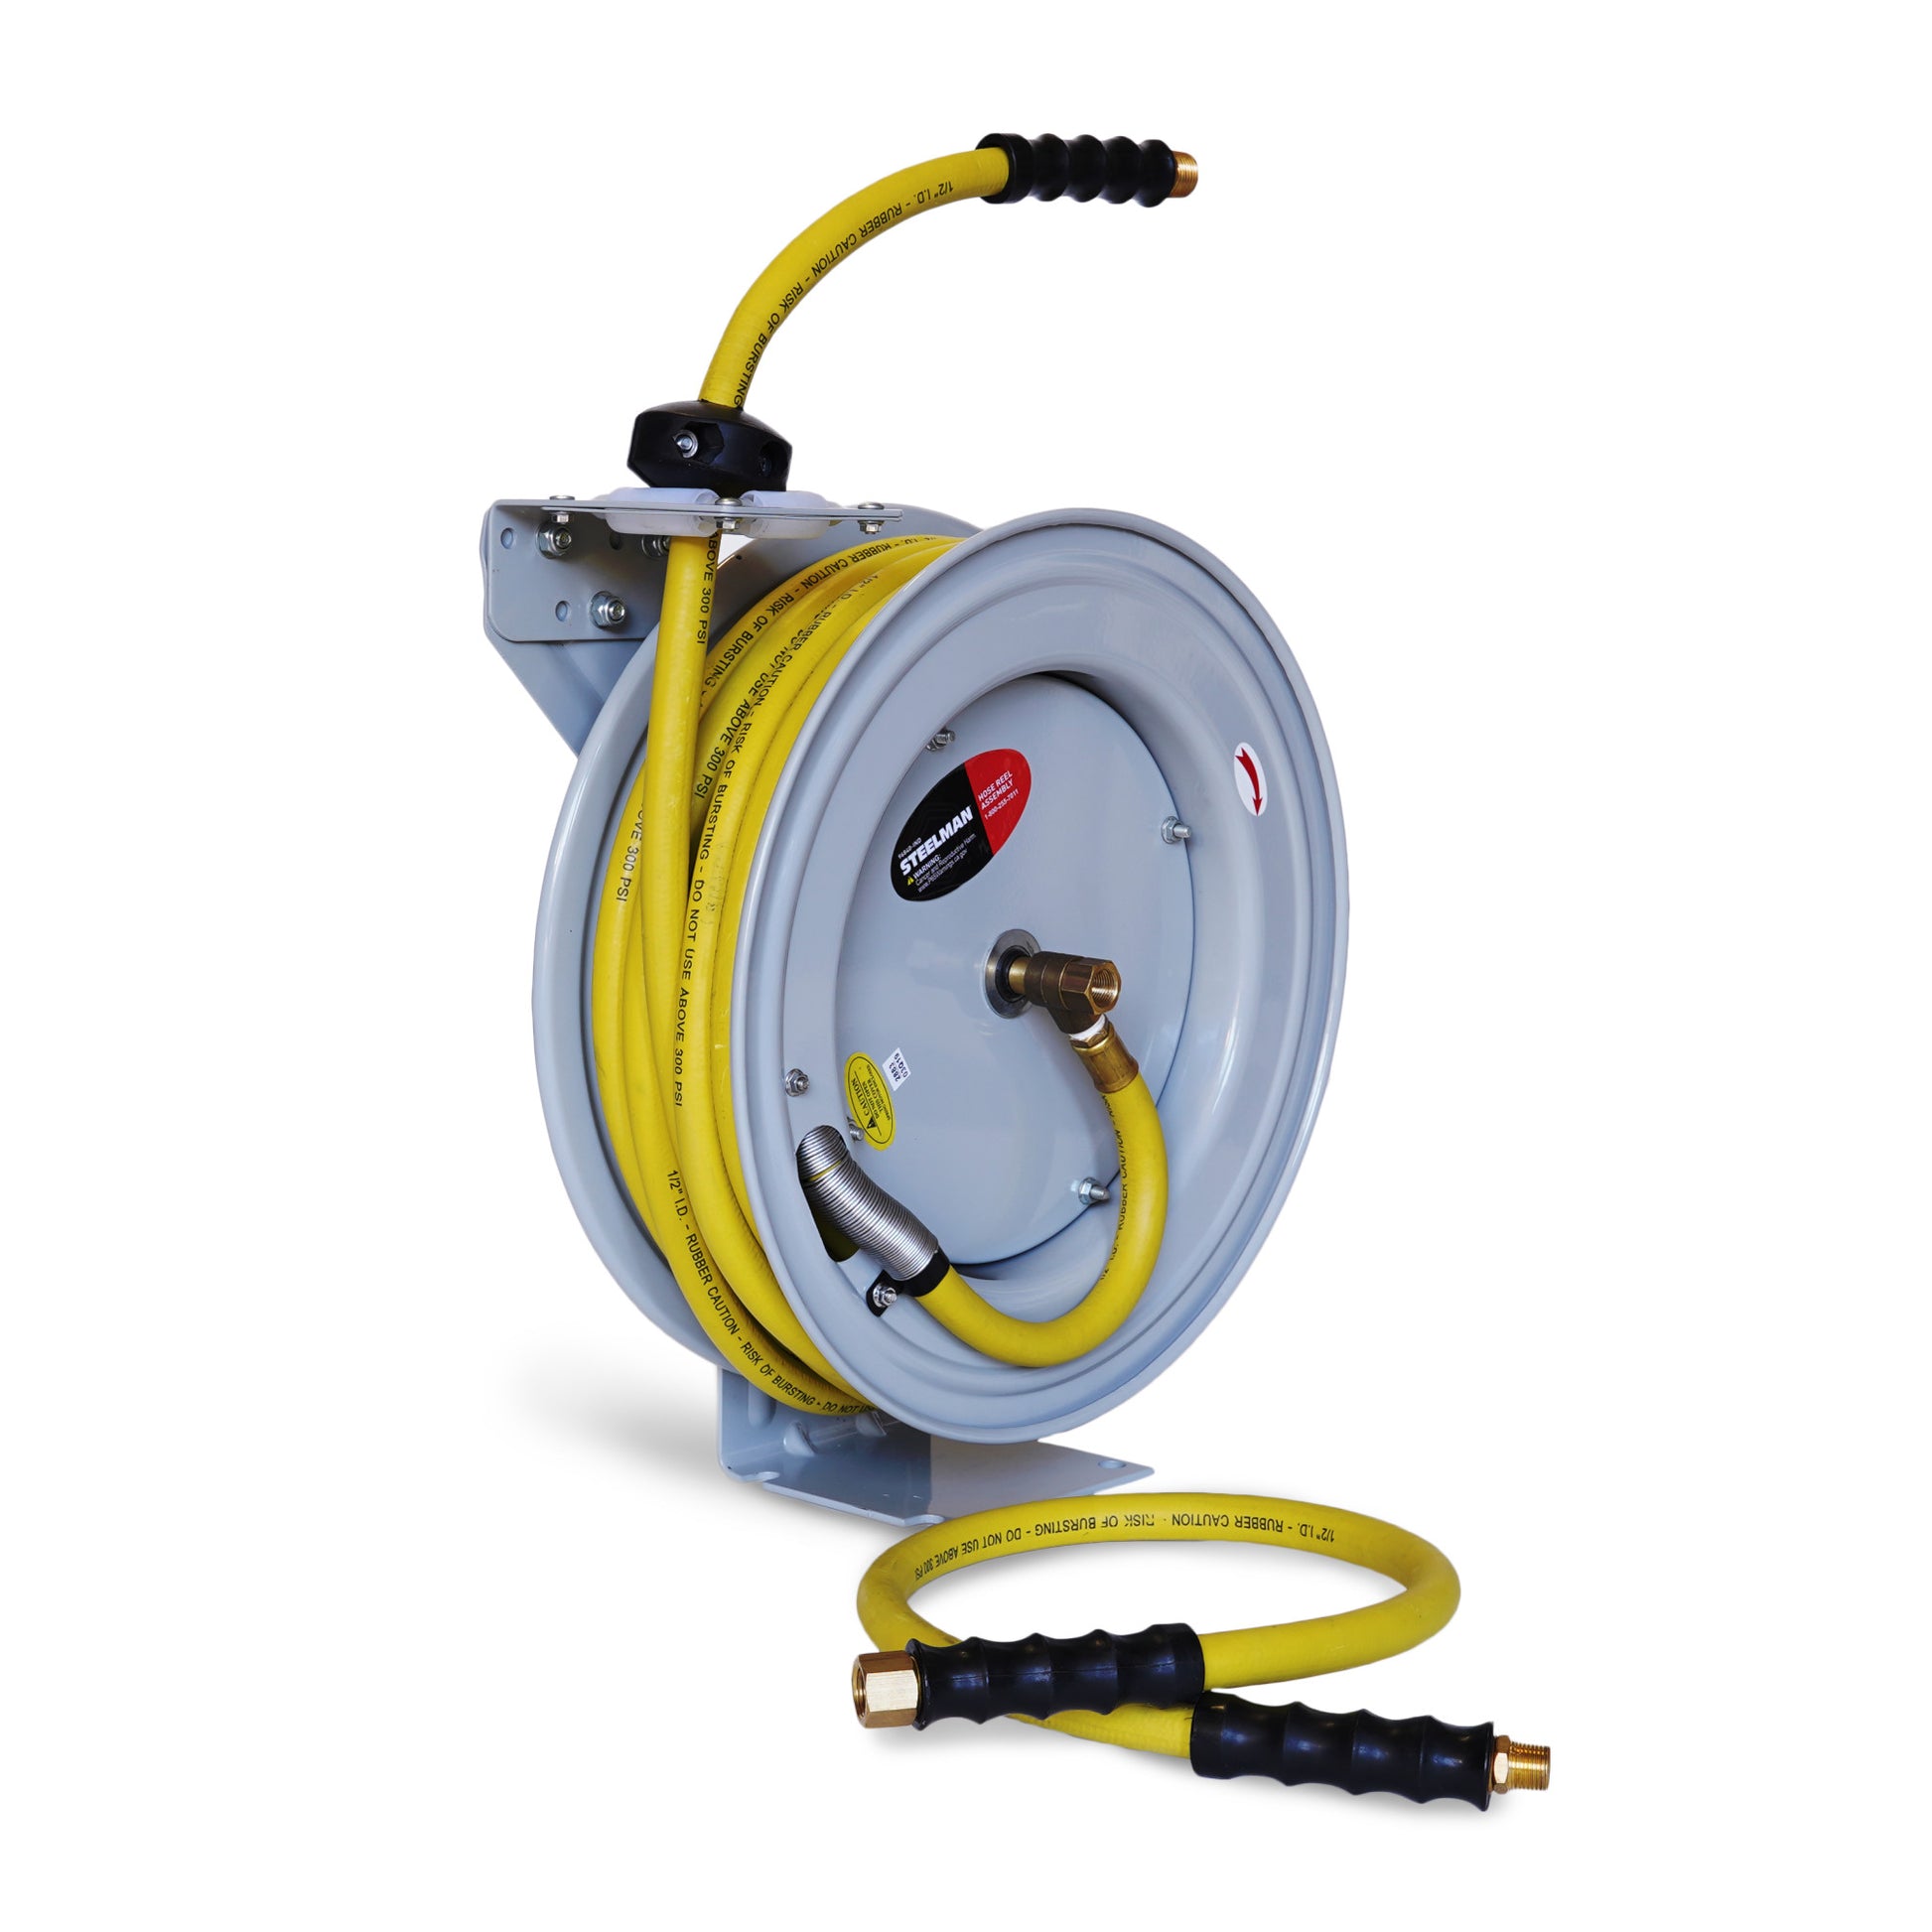 Heavy-Duty 4FT Steel Hose Reel Connector: 4000 PSI, All-Weather Wrap Finish